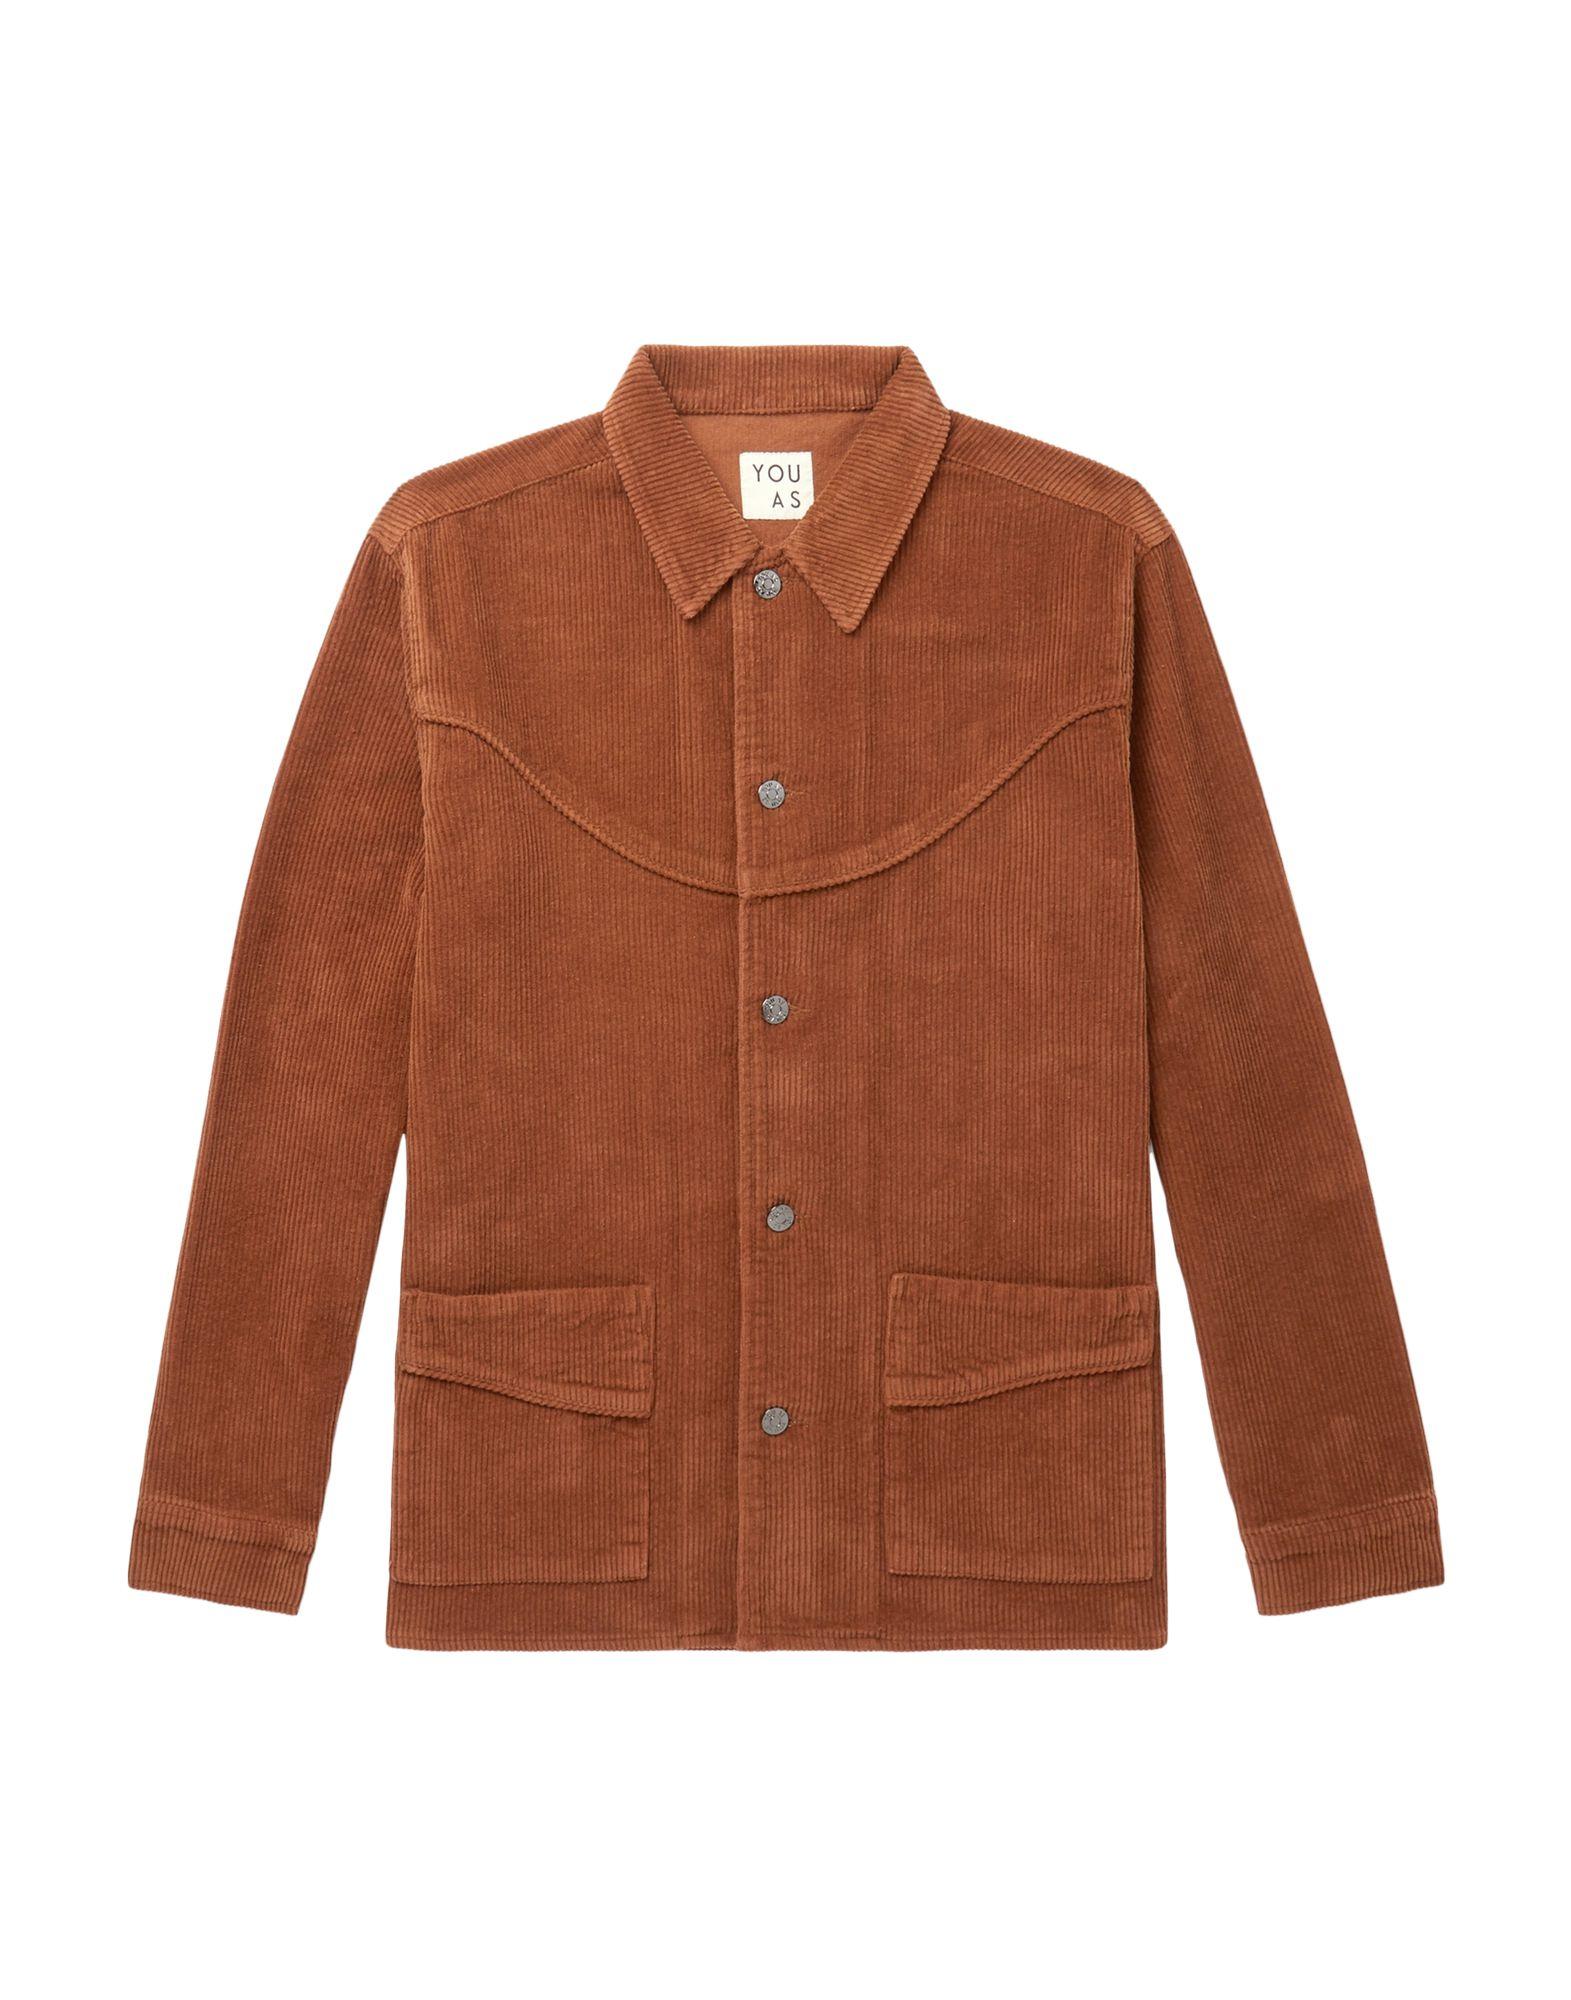 You As Cotton Jacket in Camel (Brown) for Men - Save 42% - Lyst